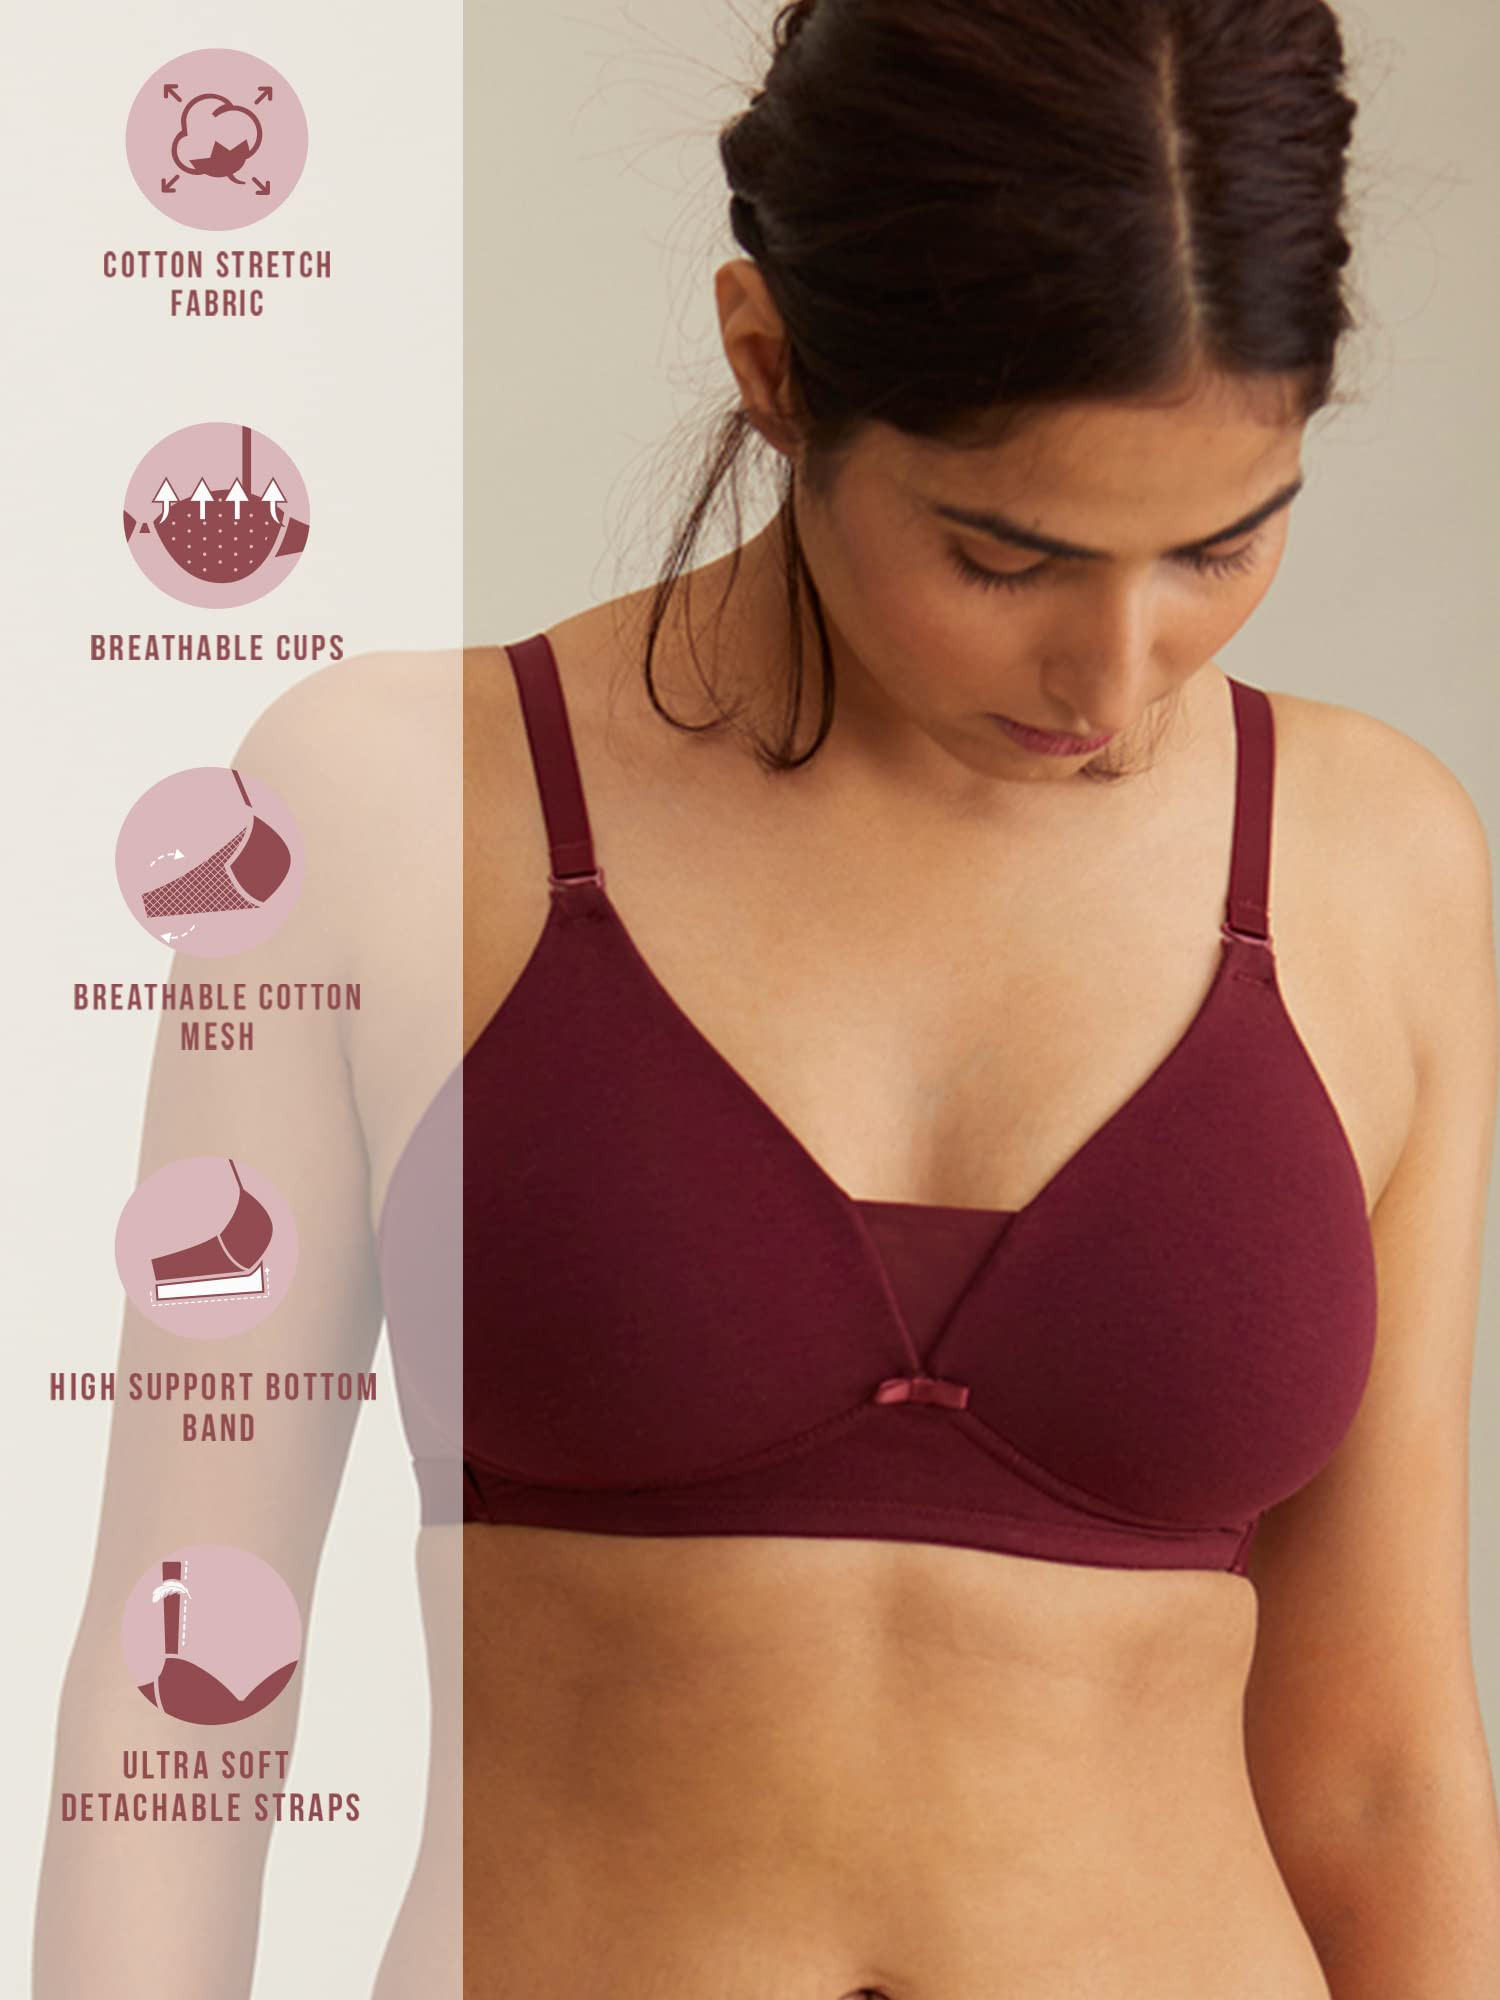 https://www.fastemi.com/uploads/fastemicom/products/nykd-womenamp039s-cotton-lightly-padded-seamless-wire-free-everyday-t-shirt-bra-for-women-daily-use-wireless-34th-coverage---bra-nyb003-maroon-34d-1nsize-34d-243083425042057_l.jpg